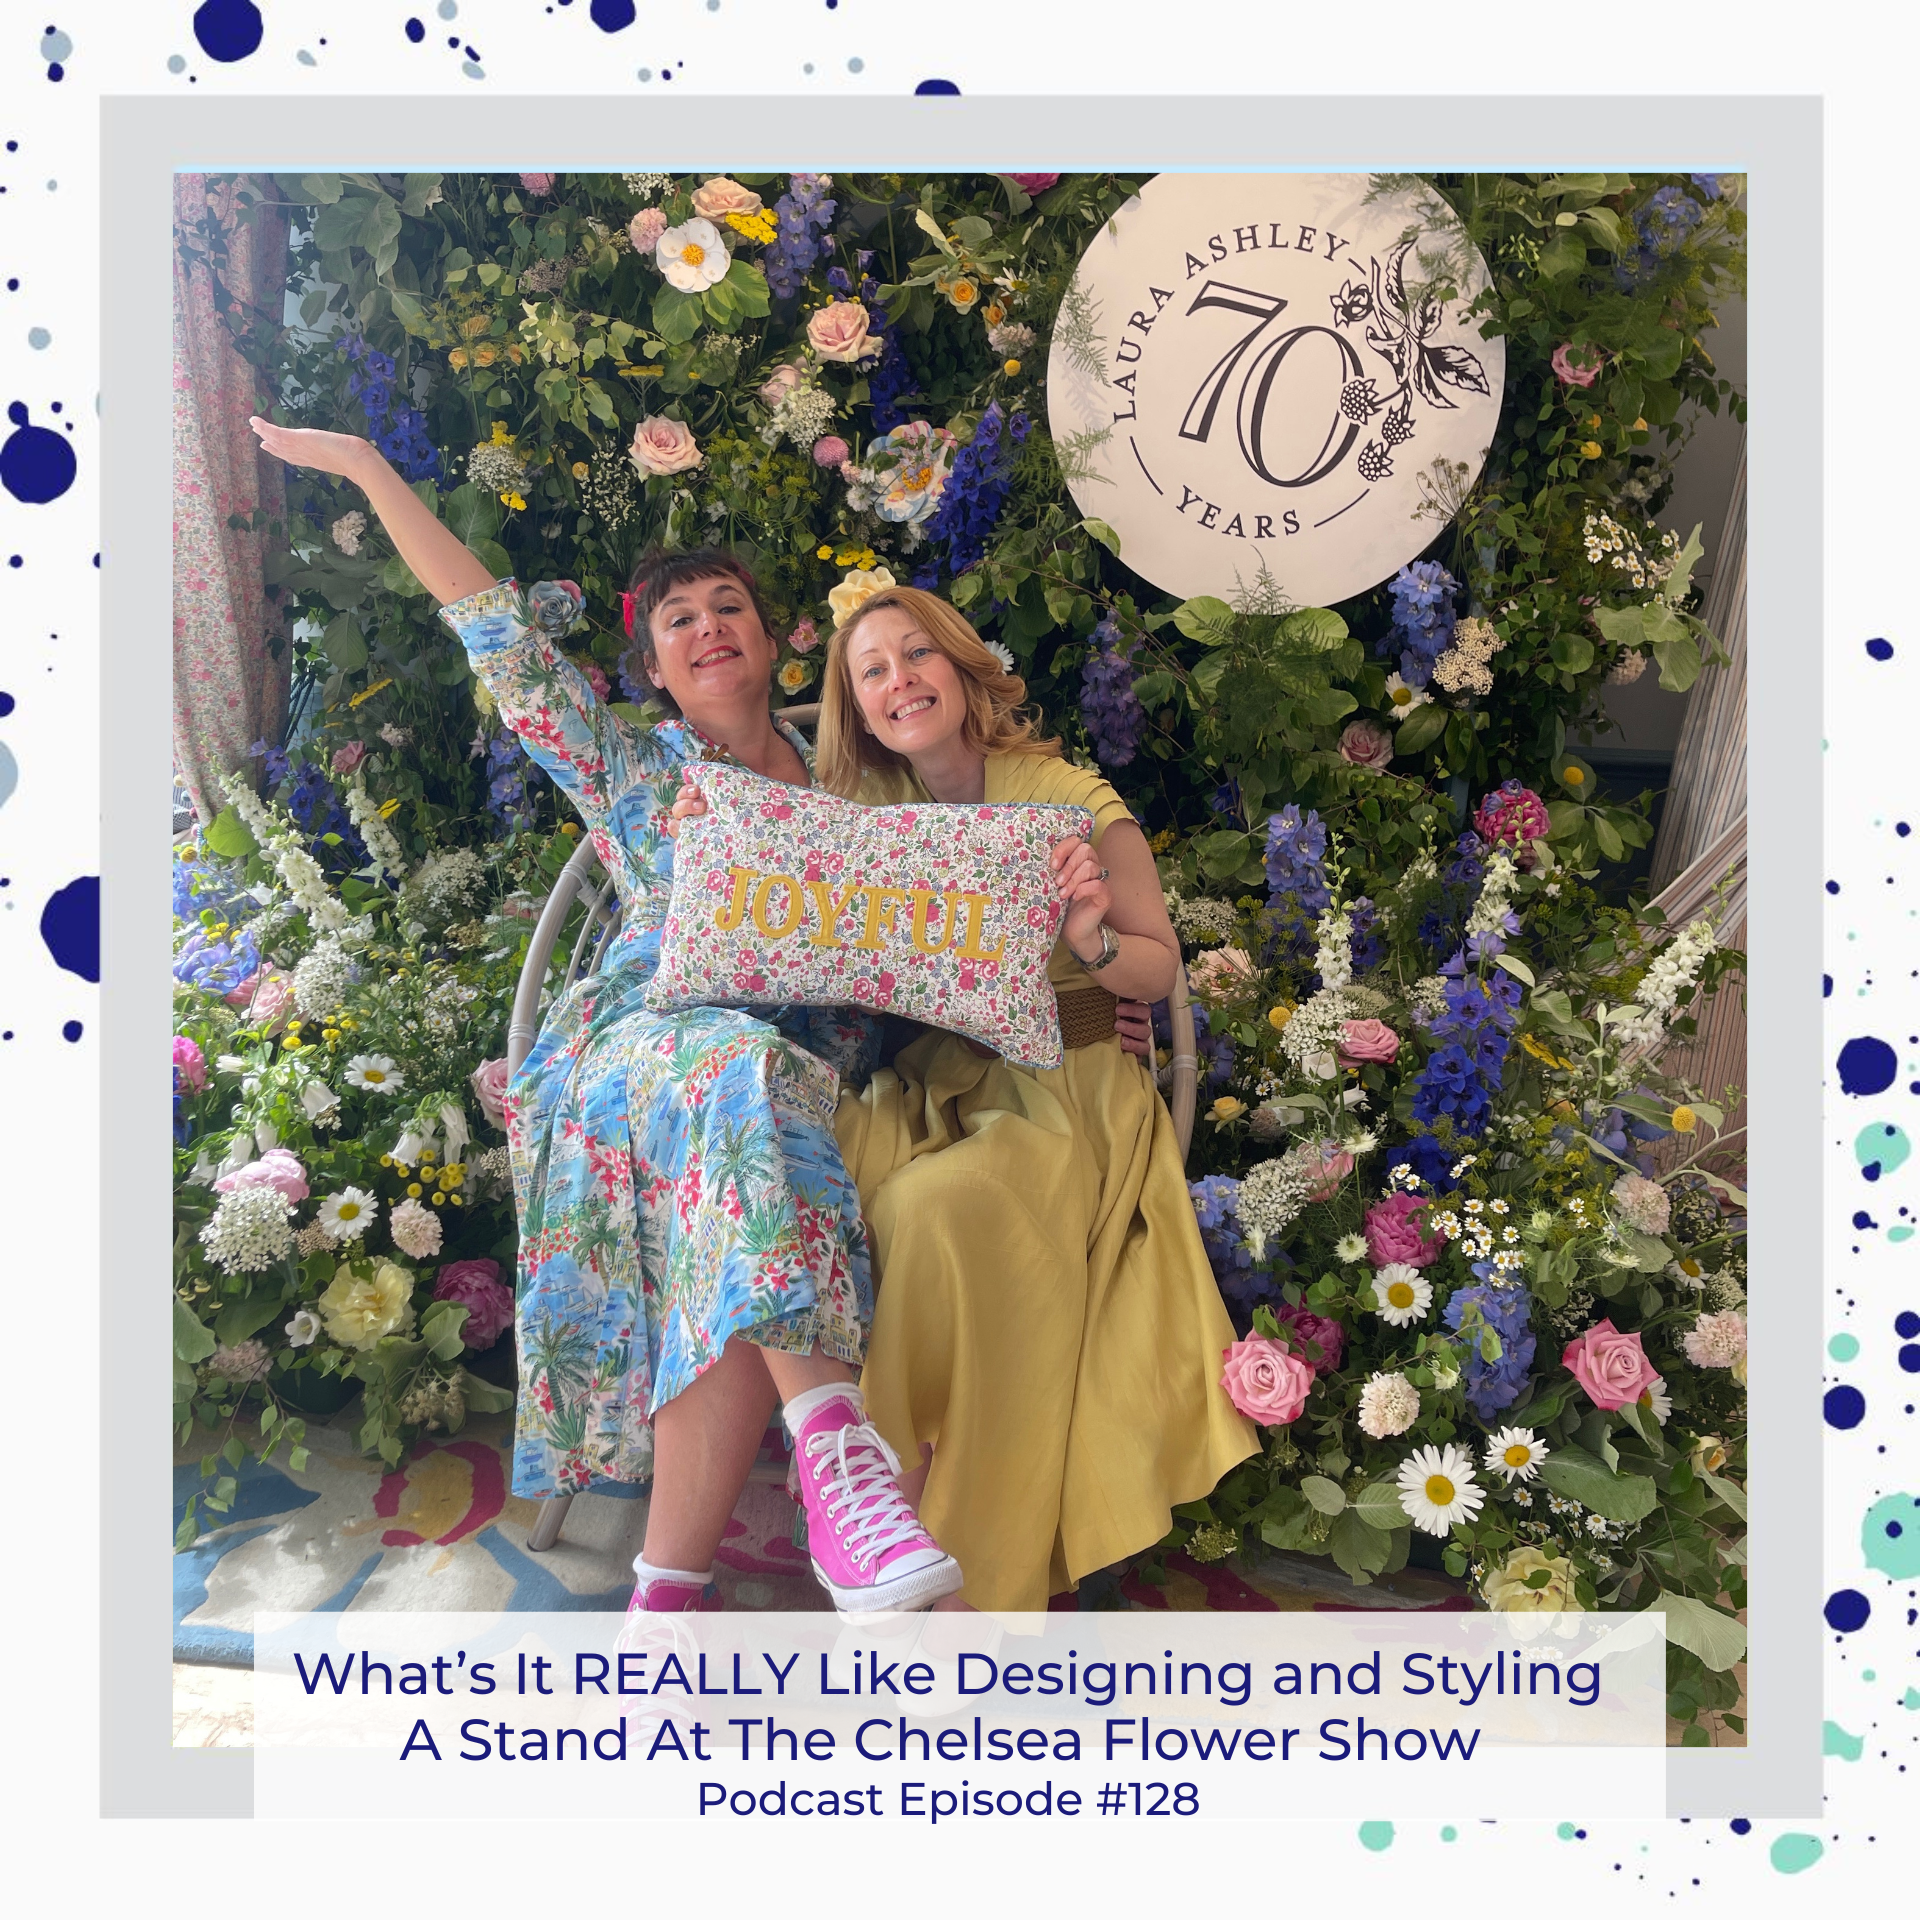 Claire Morgan and Dilly Orme on the Laura Ashley Stand at the Chelsea Flower Show 